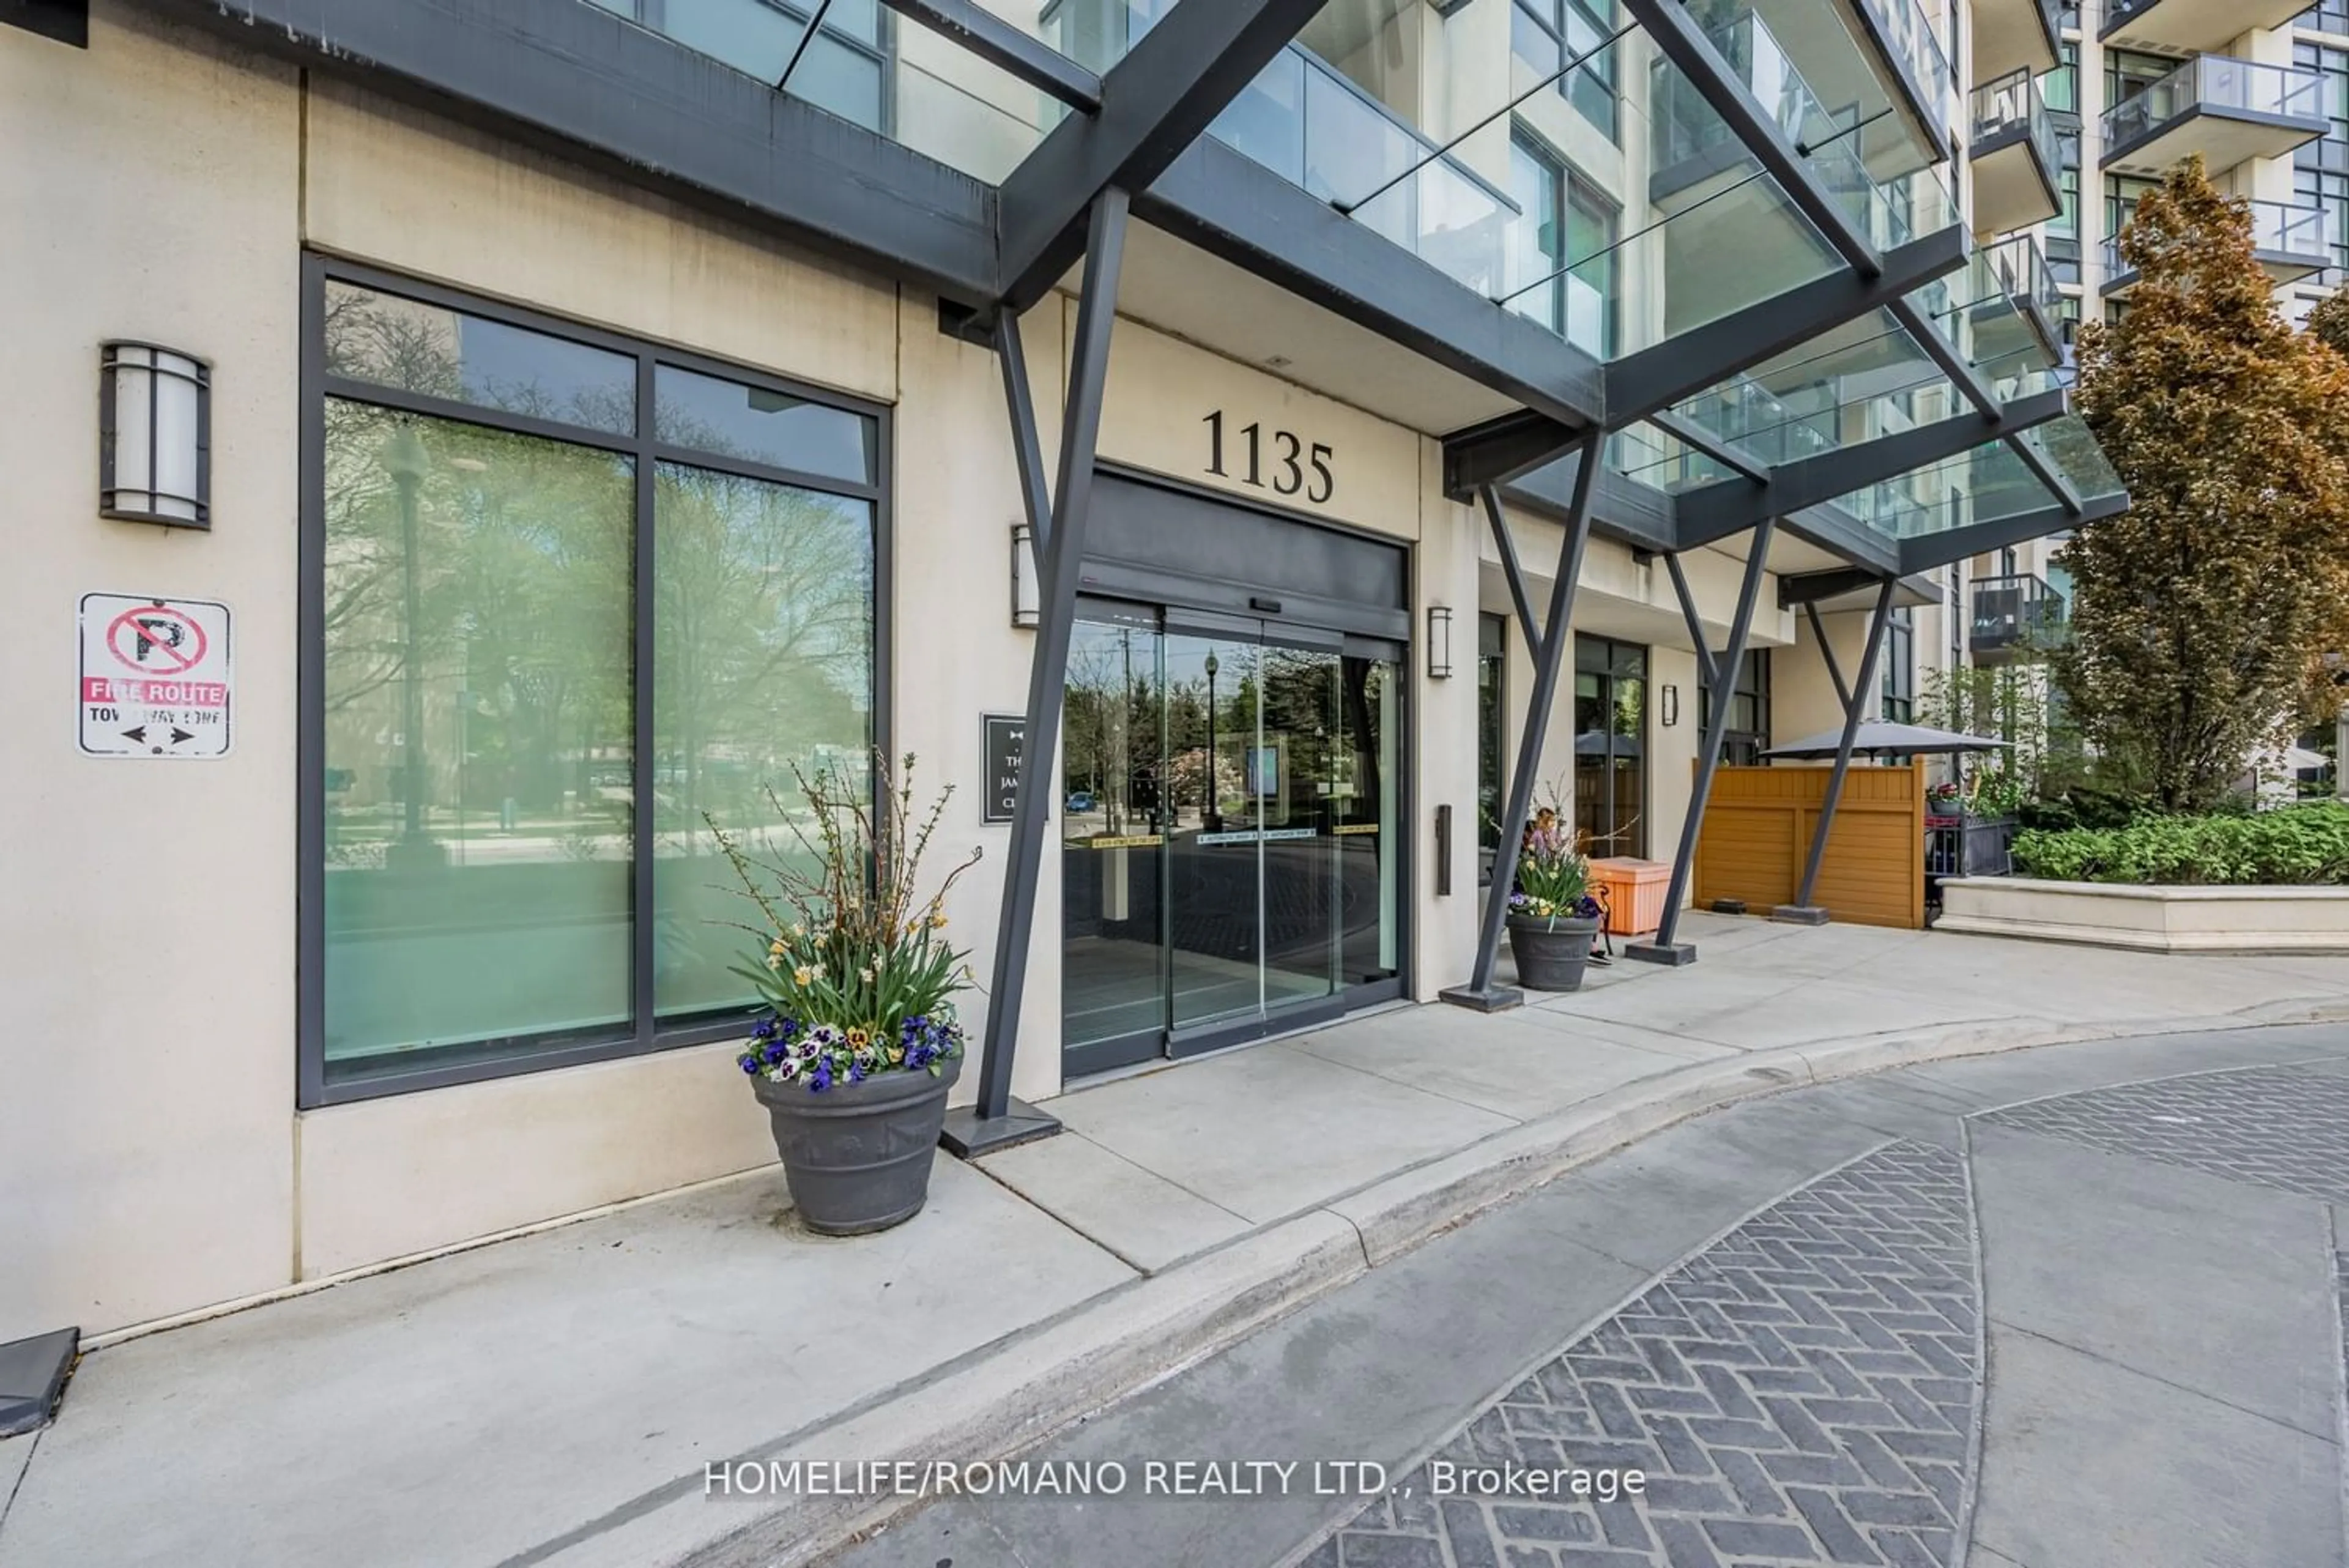 Indoor foyer for 1135 Royal York Rd #1102, Toronto Ontario M9A 0C3